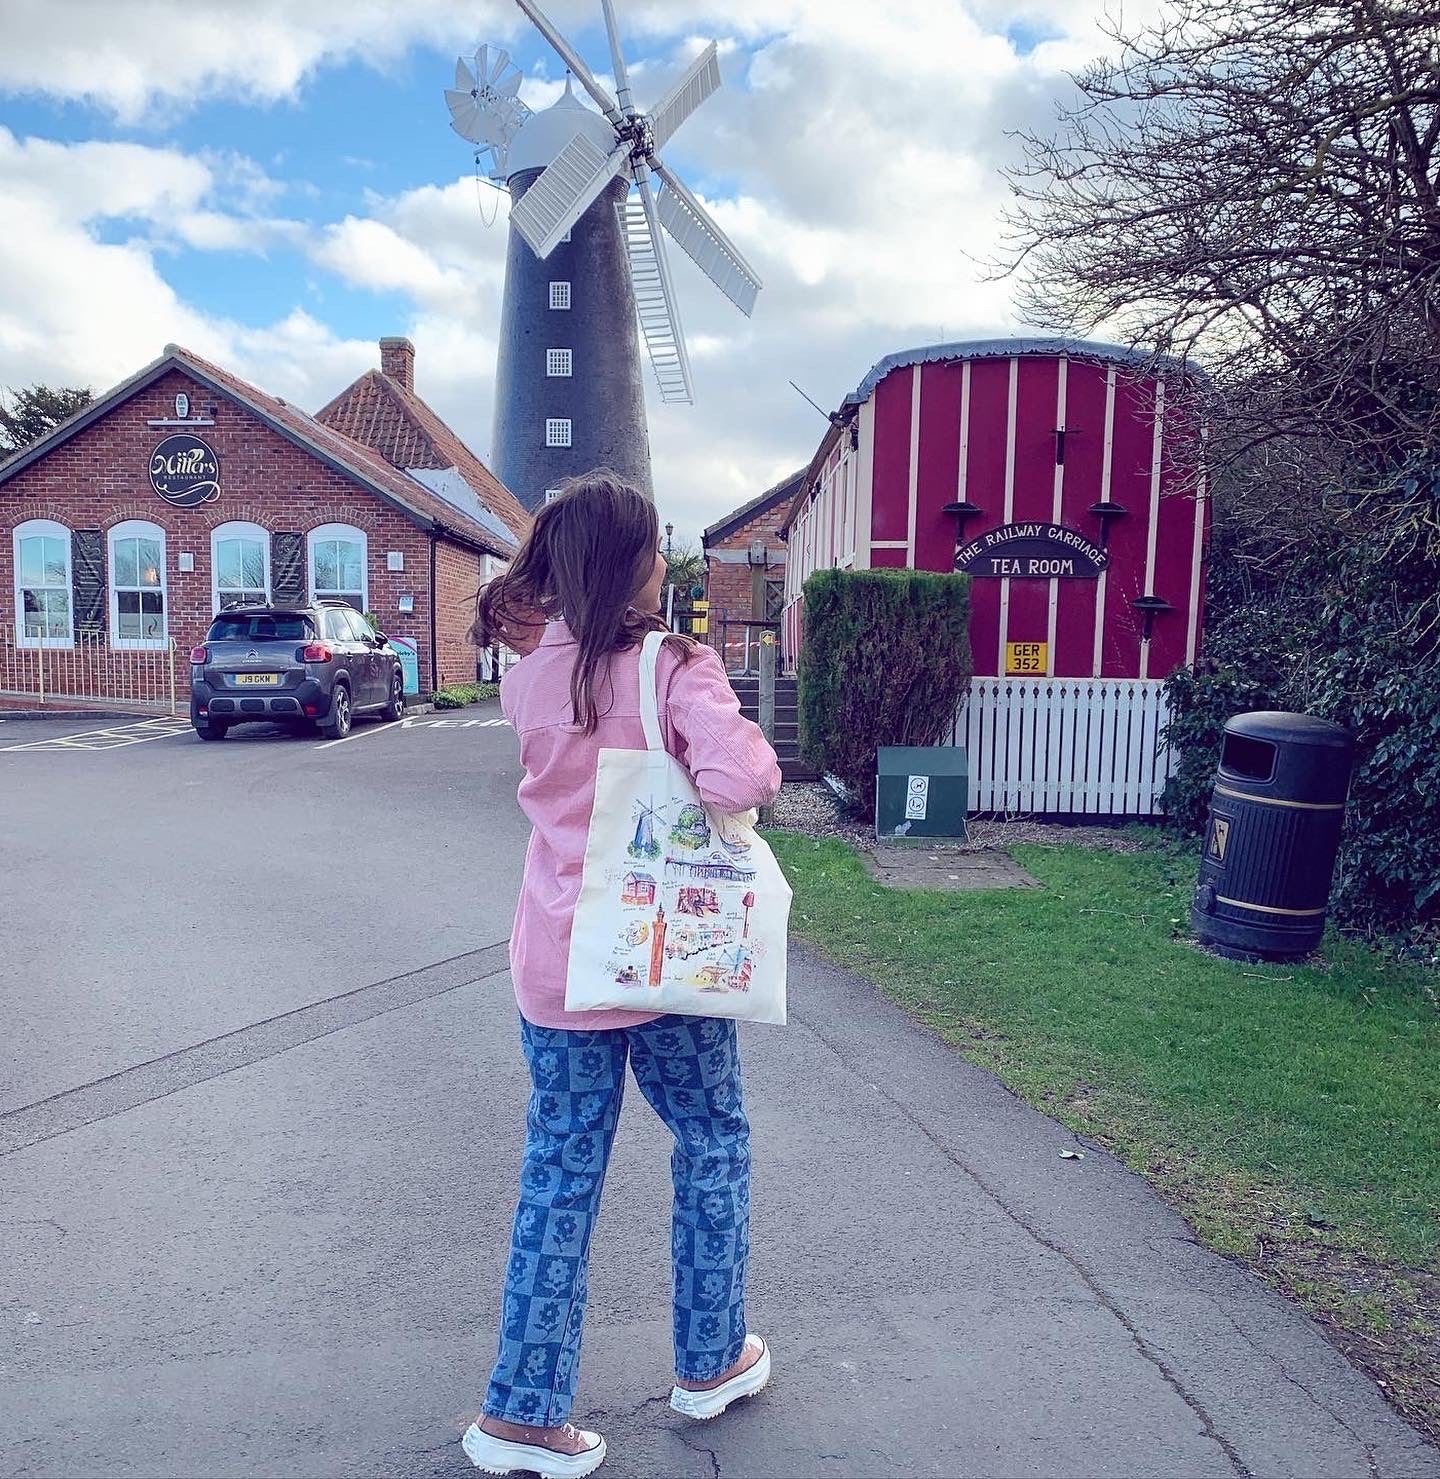 Model holding an Organic tote bag in front of the Waltham Windmill, featuring watercolour illustrations of landmarks in Grimsby and Cleethorpes, designed by local artist, Eve Leoni Smith.